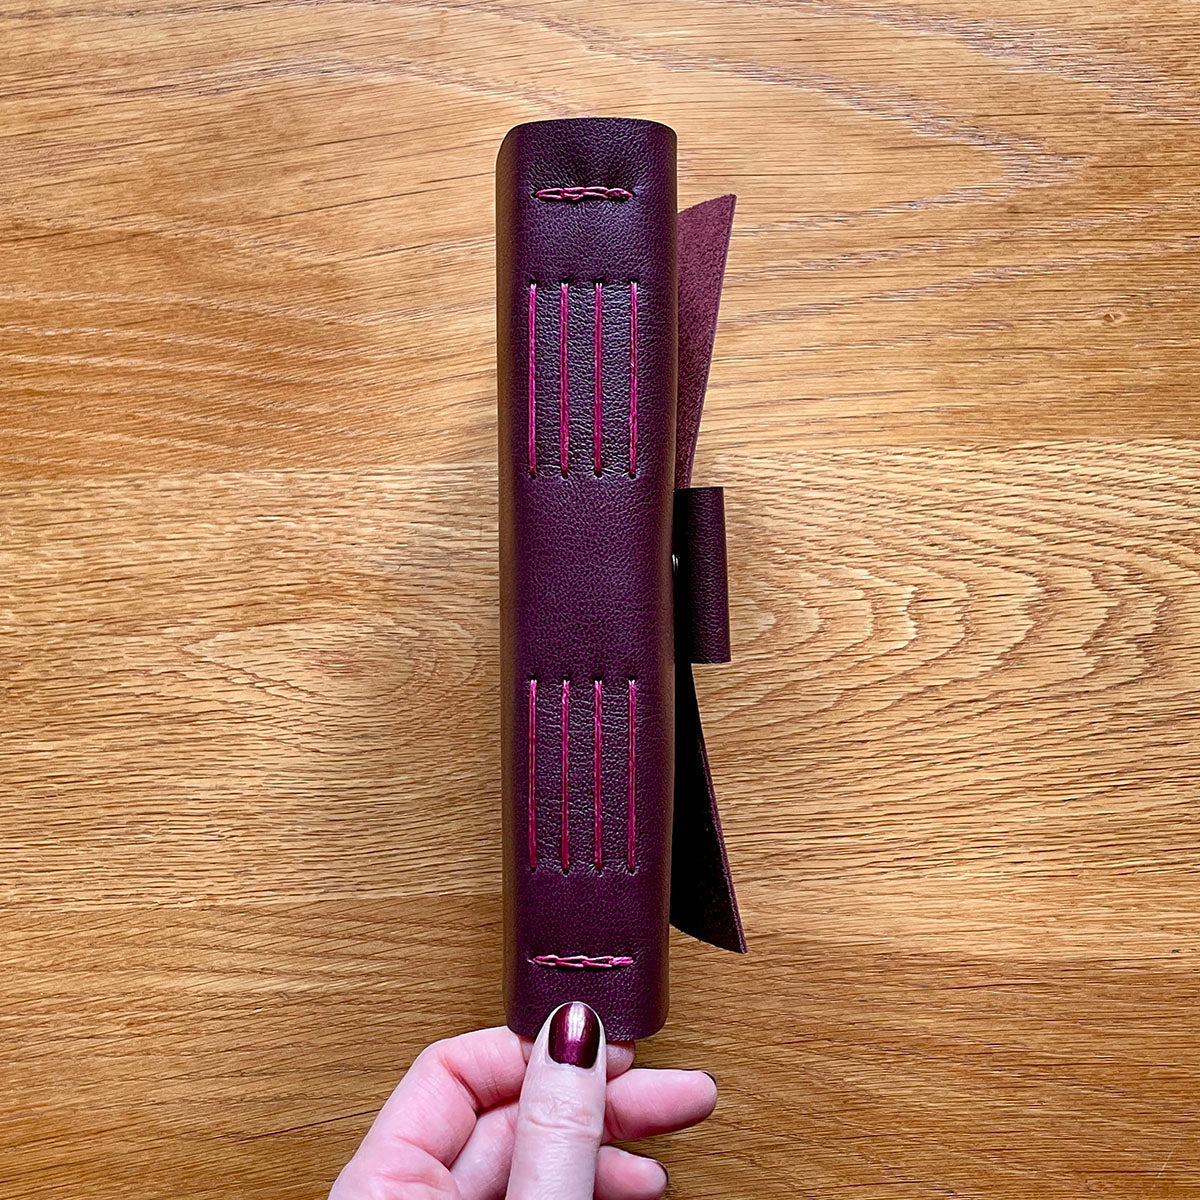 Leather Journal: Maroon and Magenta, bound by hand